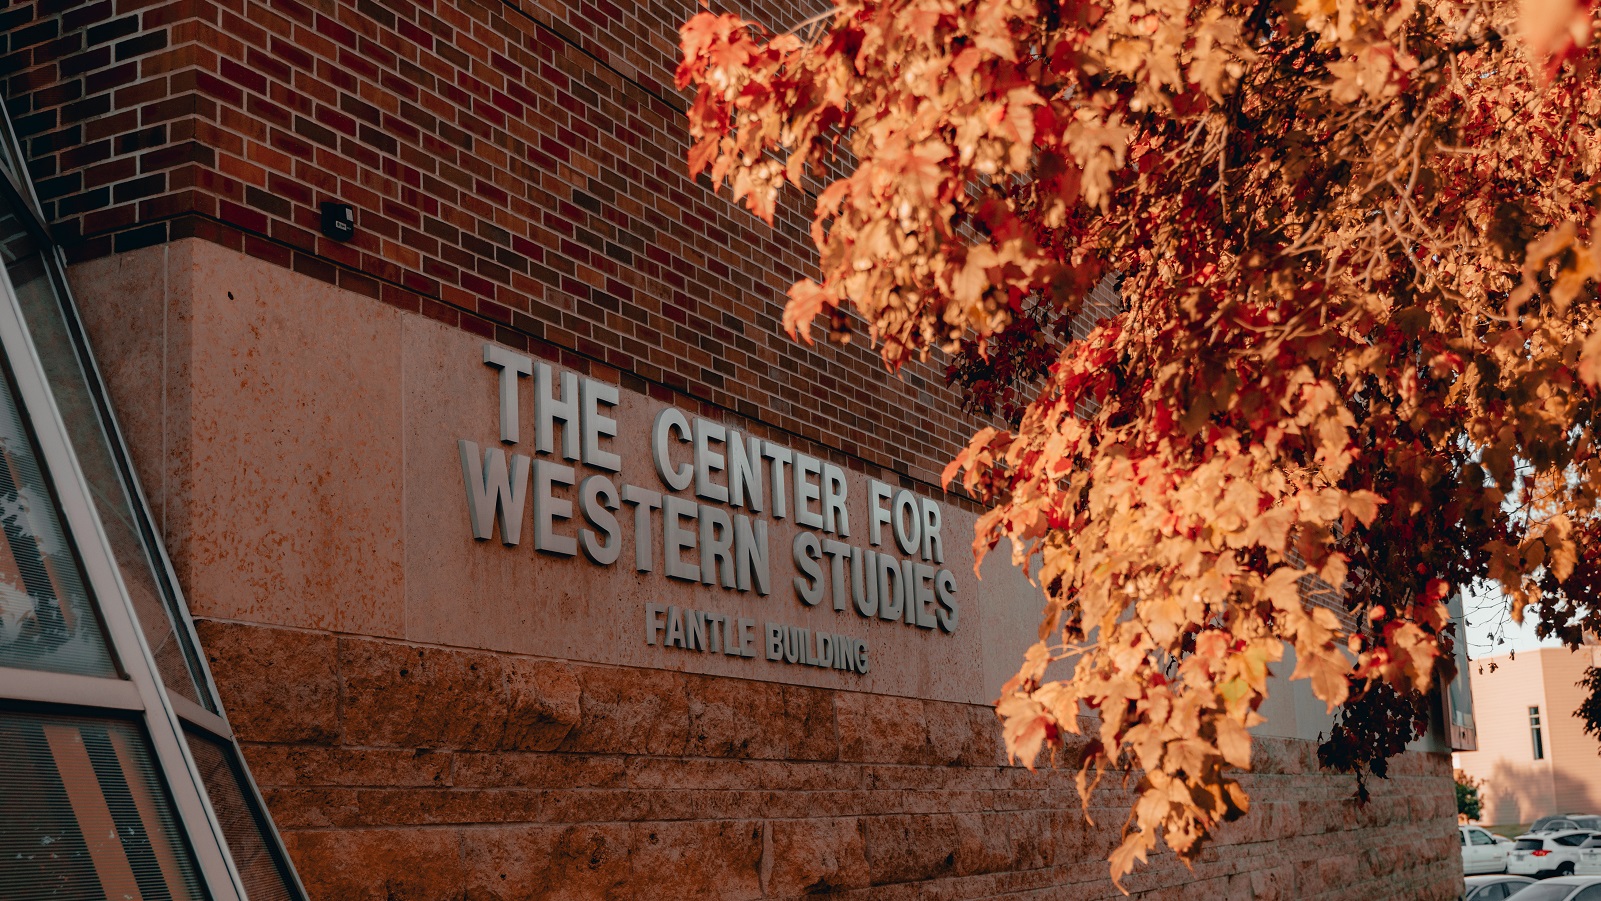 Center for Western Studies is located in the Fantle Building